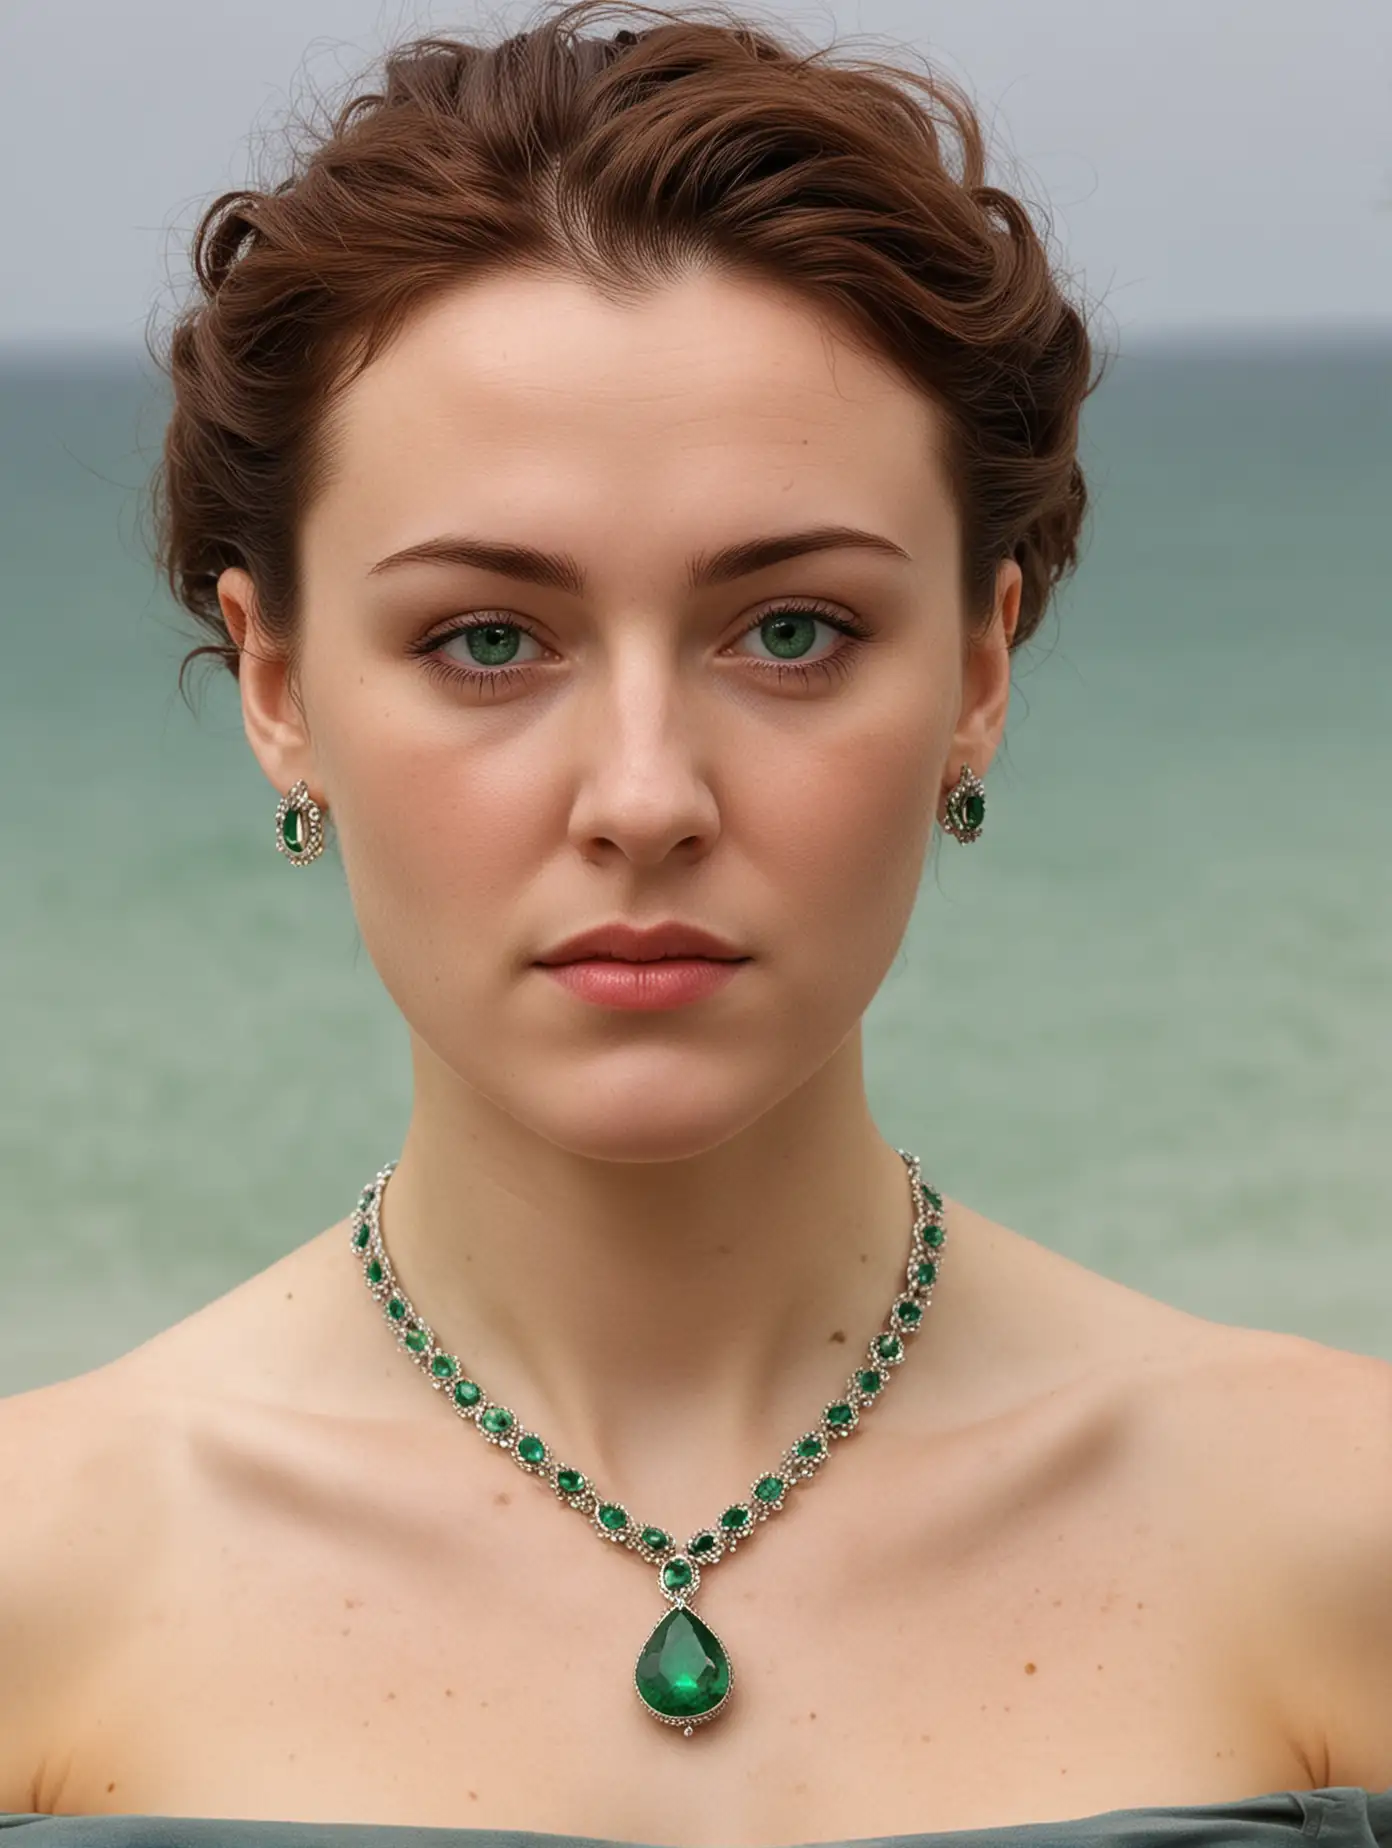 An Irish woman with Emerald necklace
